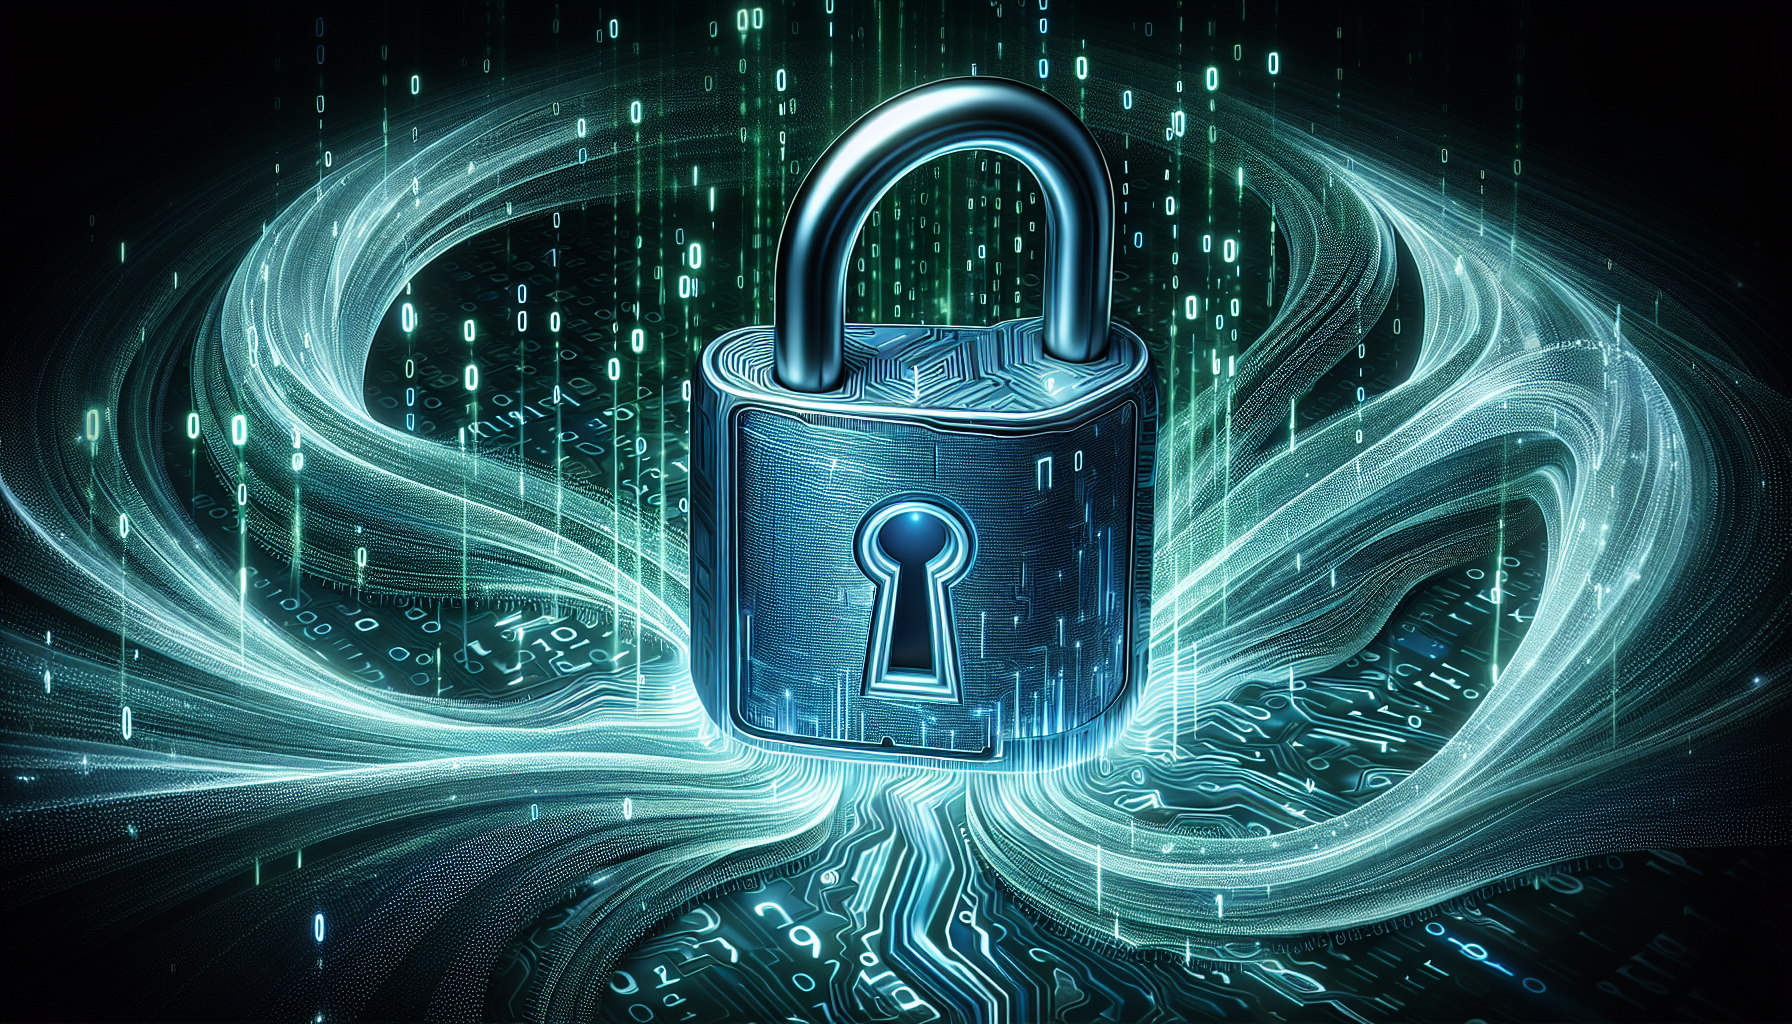 Illustration of a digital padlock with binary code to represent digital security systems